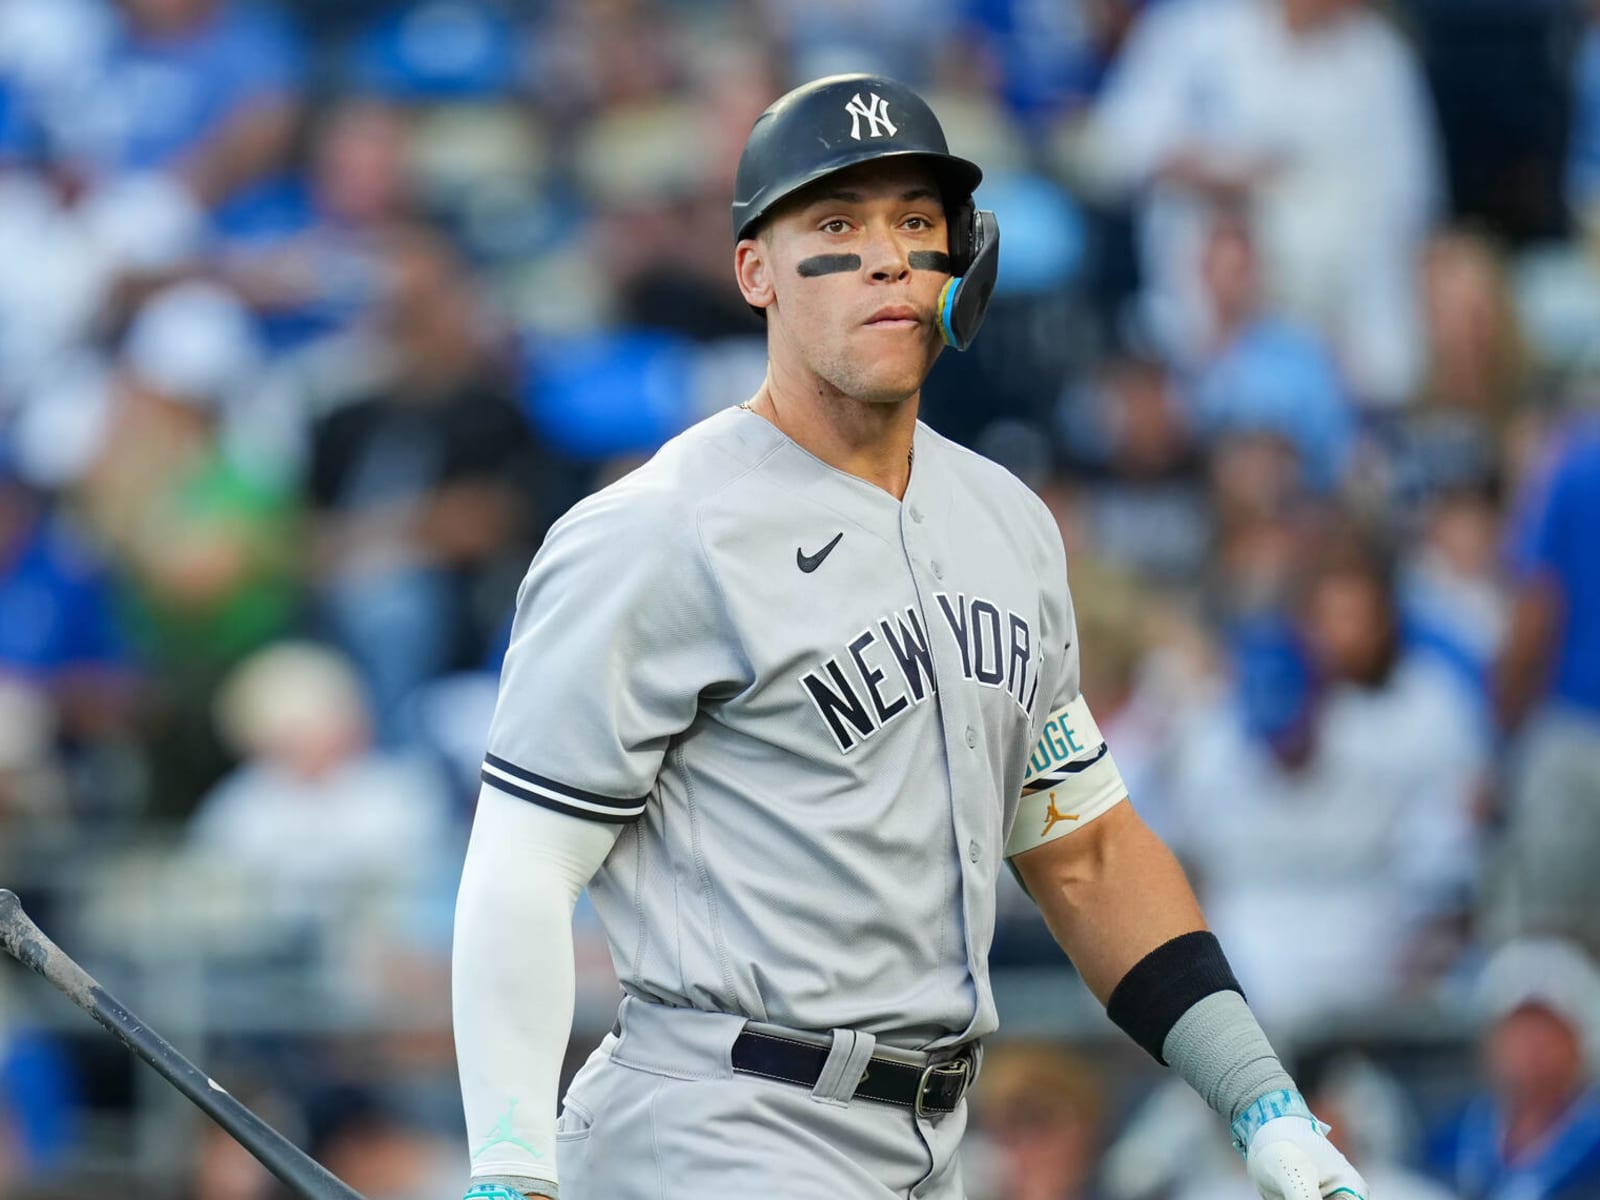 A rebound season from LeMahieu could boost the Yankees' chances